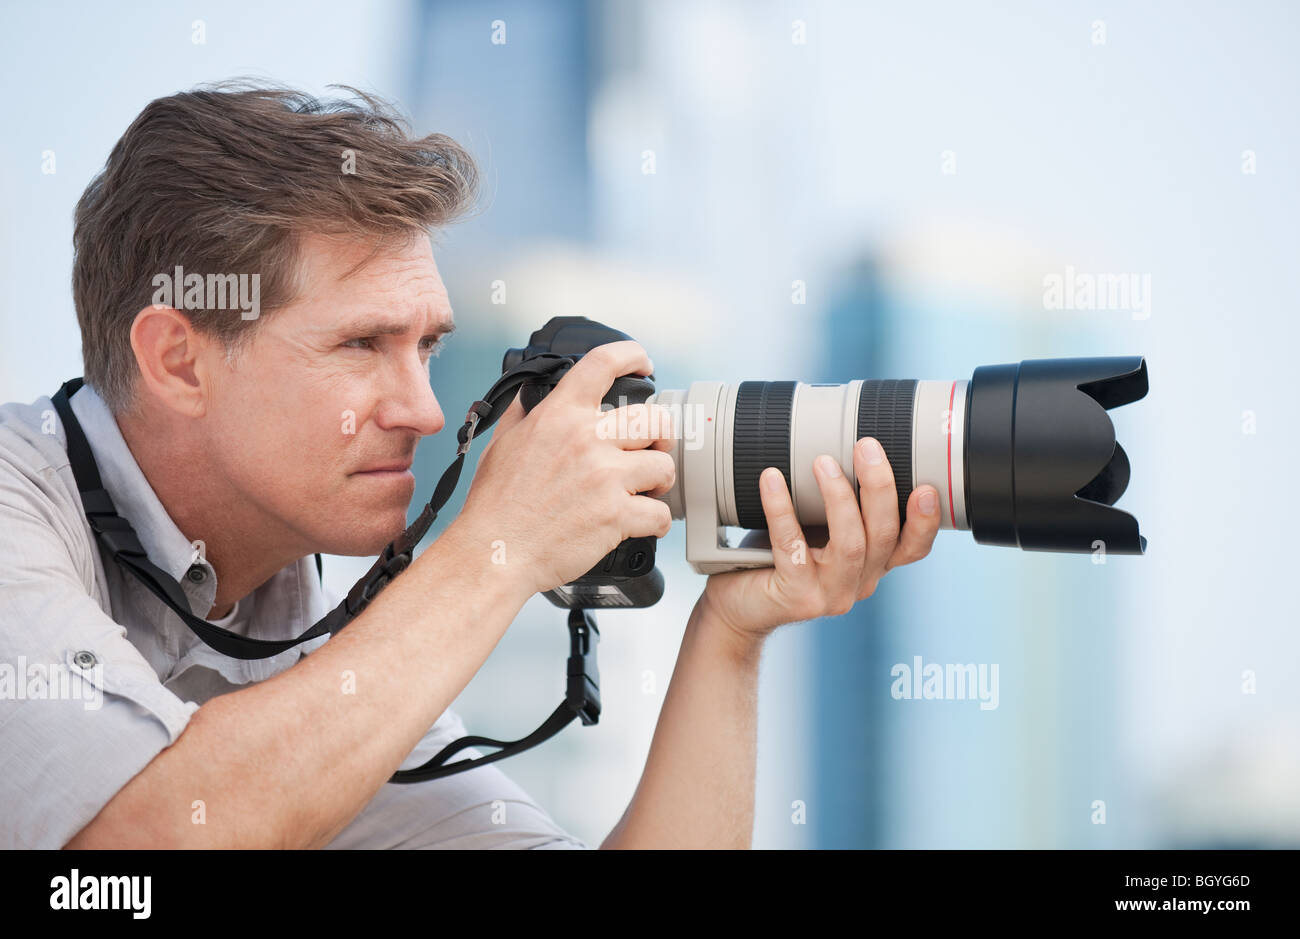 Man taking picture Stock Photo